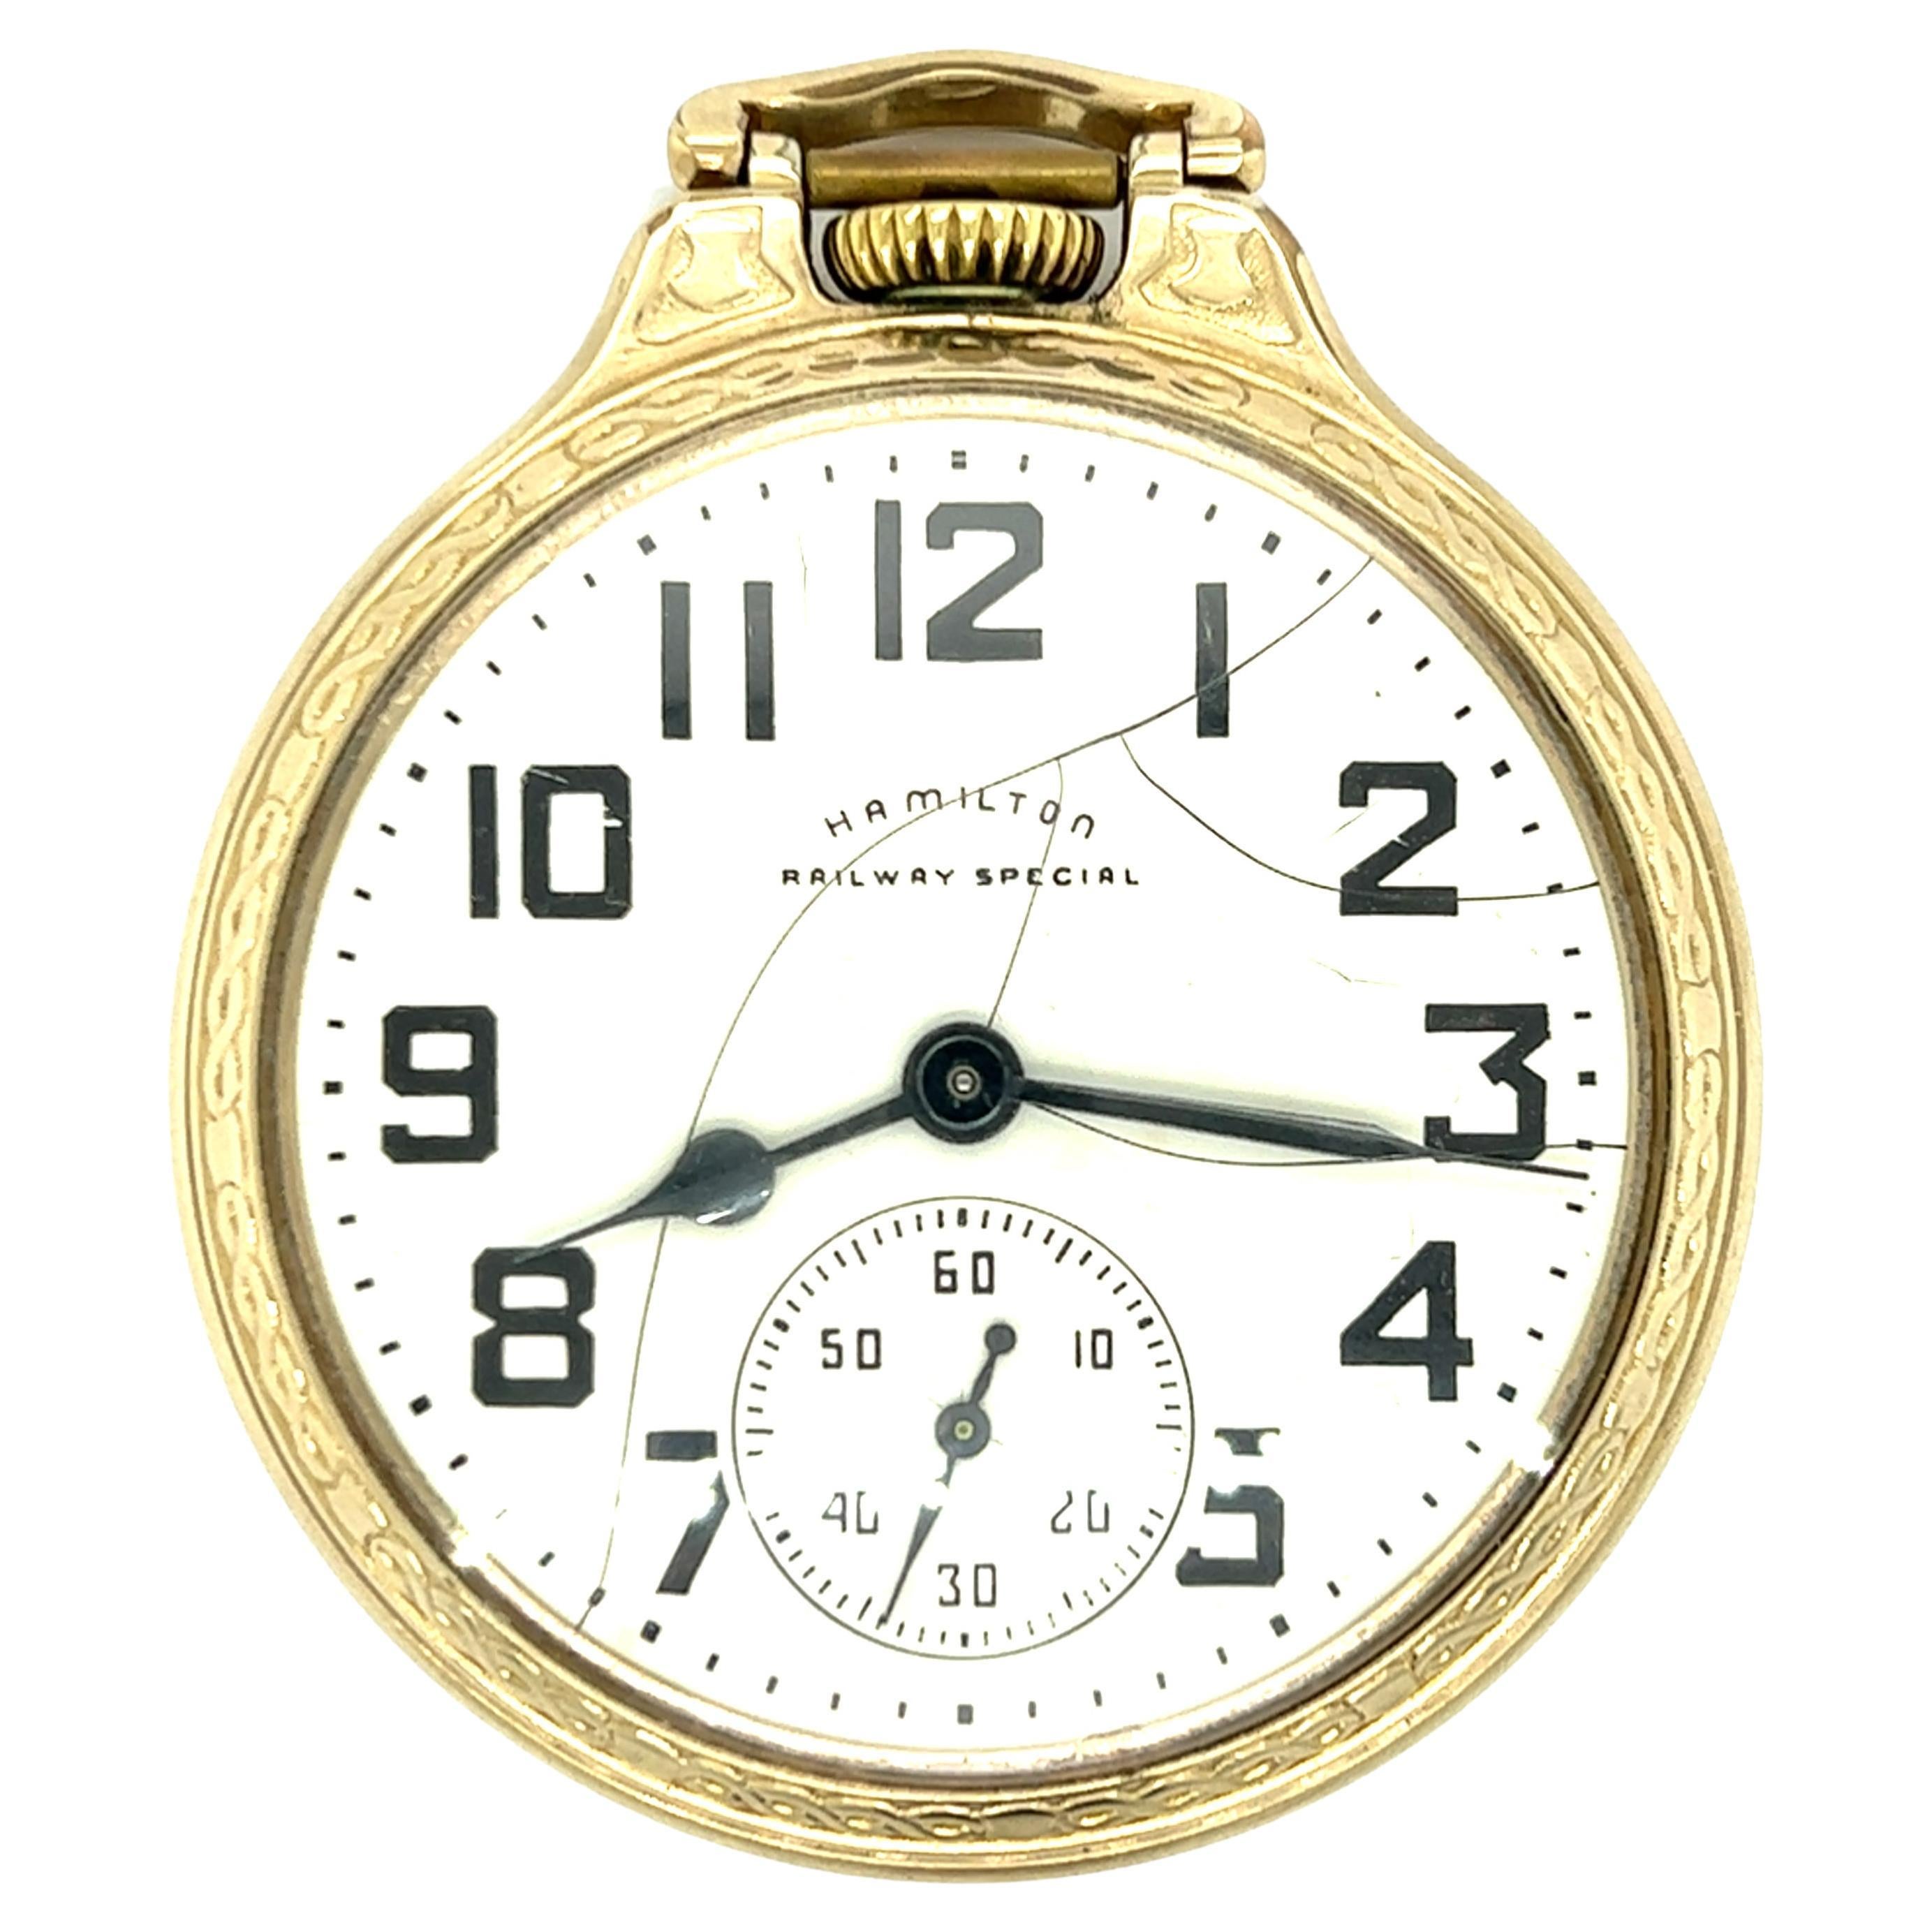 How old is a Hamilton Railway Special pocket watch?